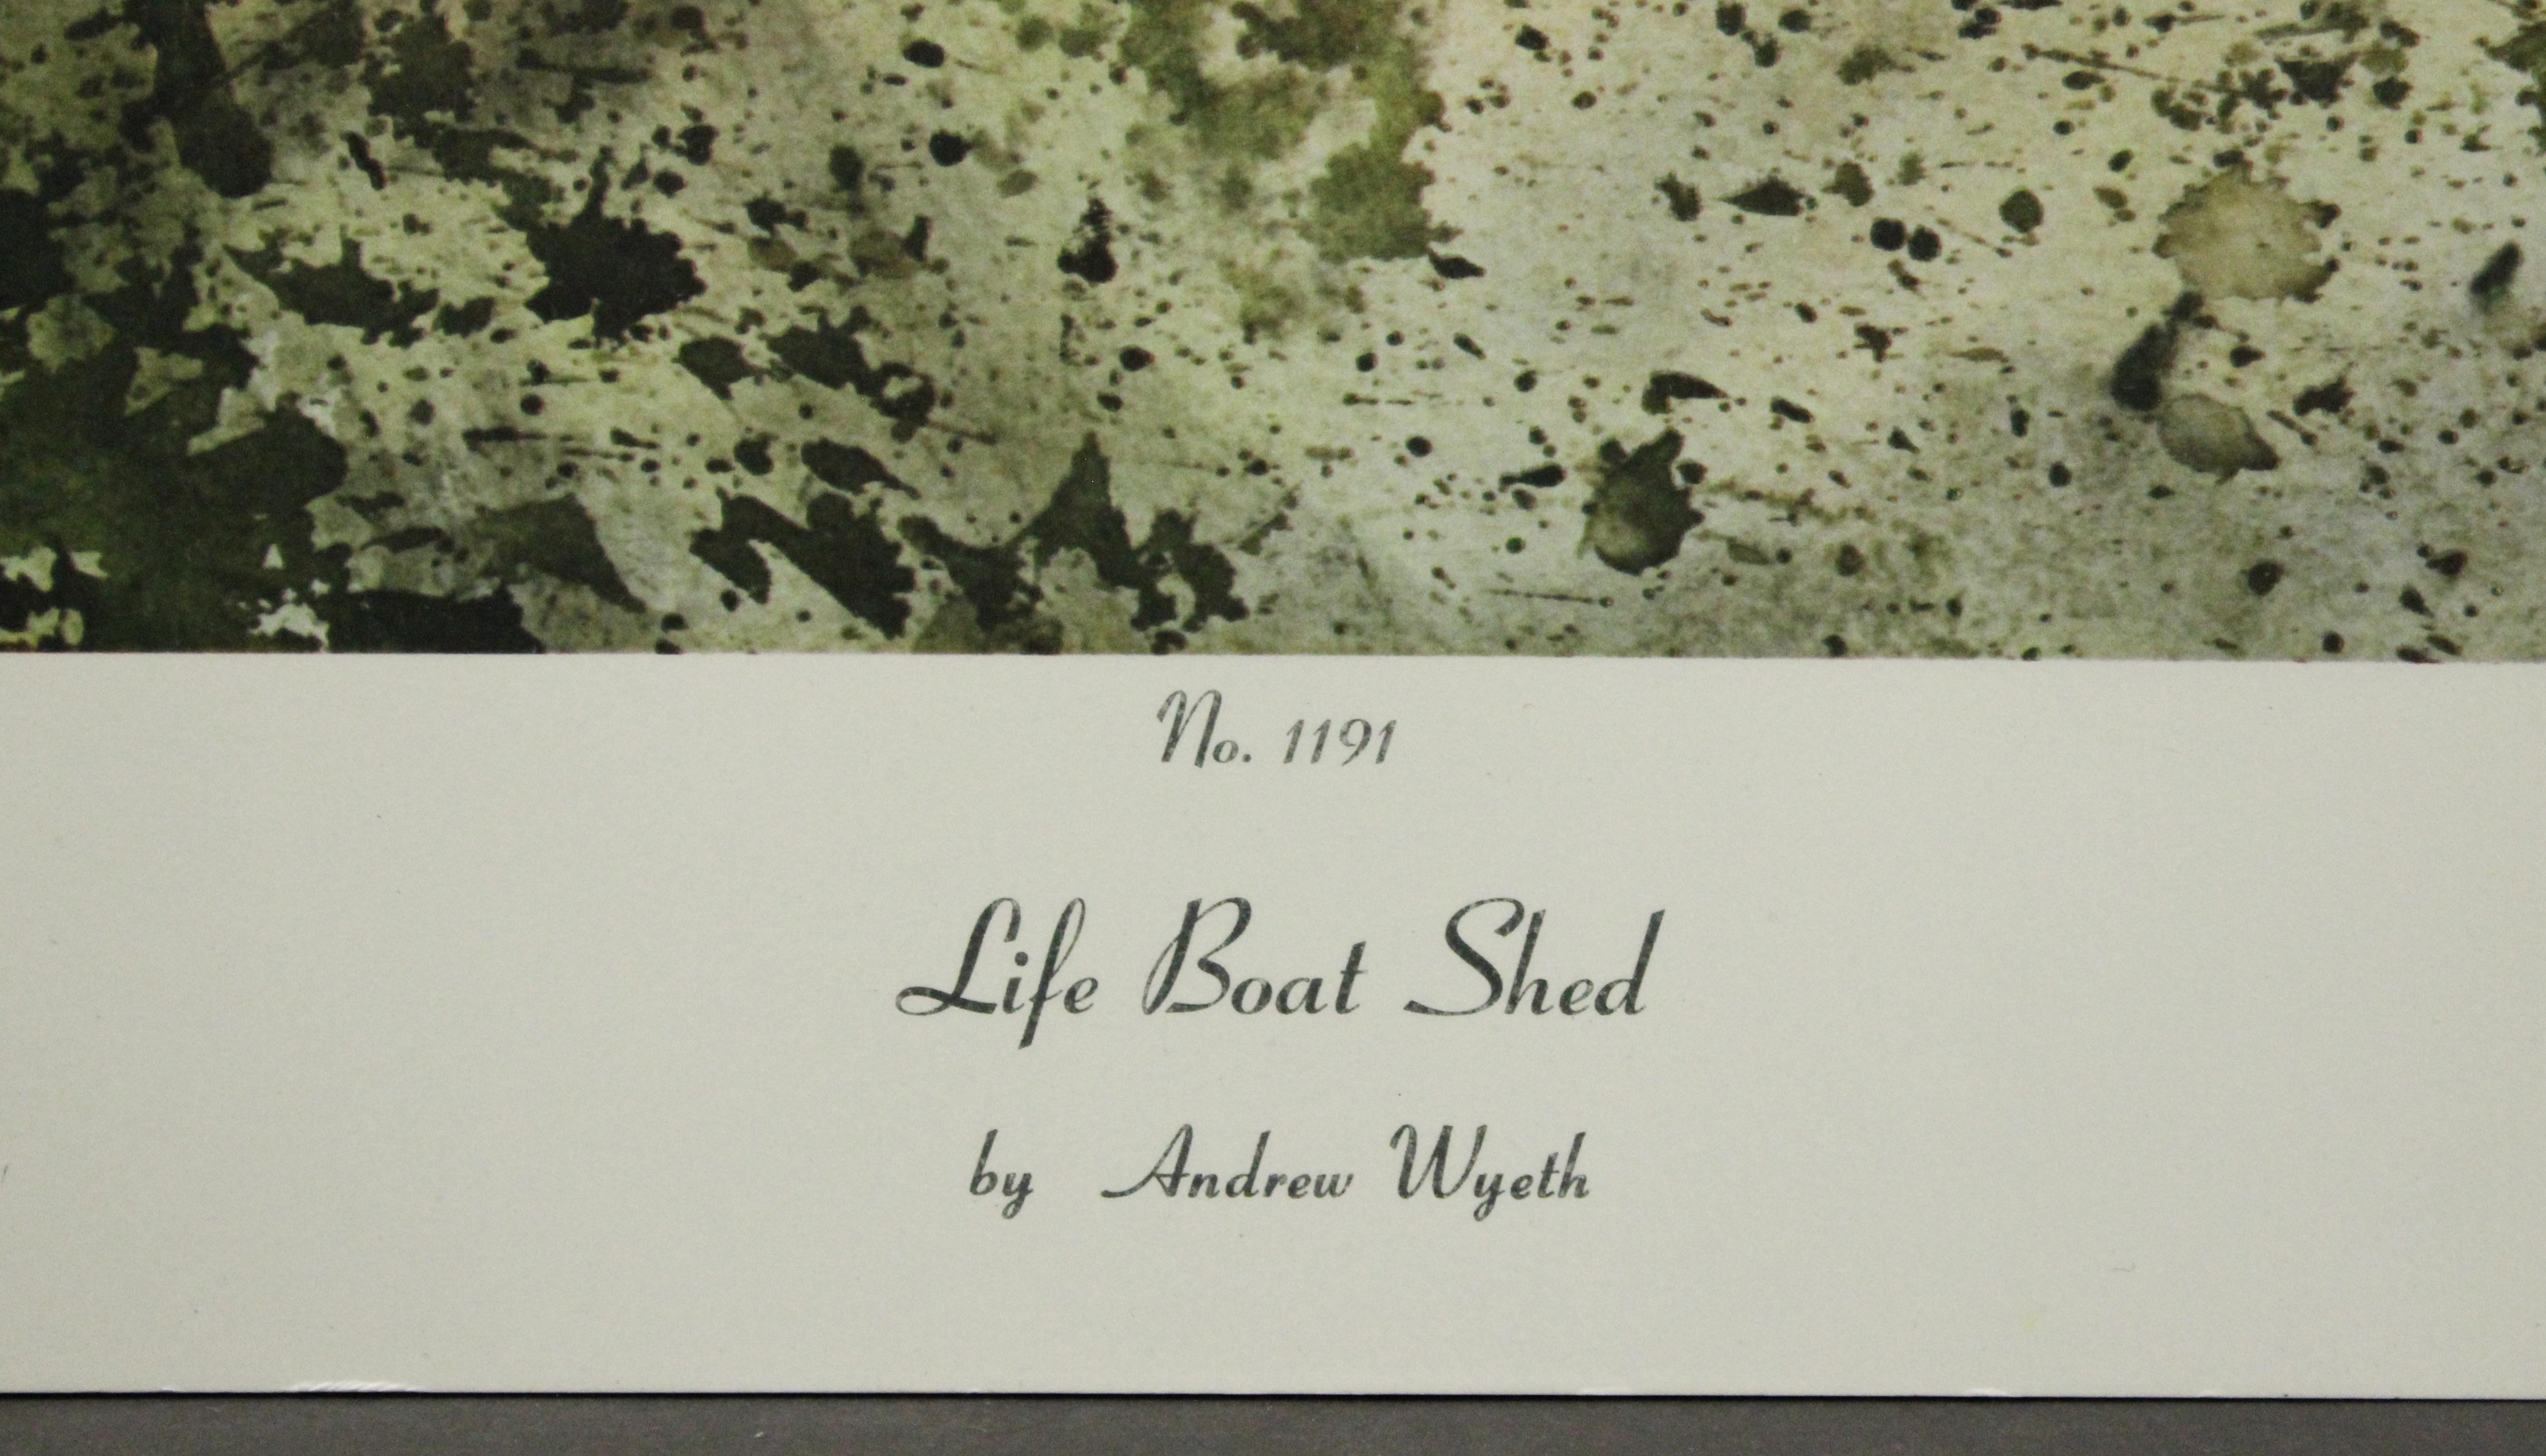 Life Boat Shed-Poster. Copyright Aaron Ashley, Inc. - Print by (after) Andrew Wyeth